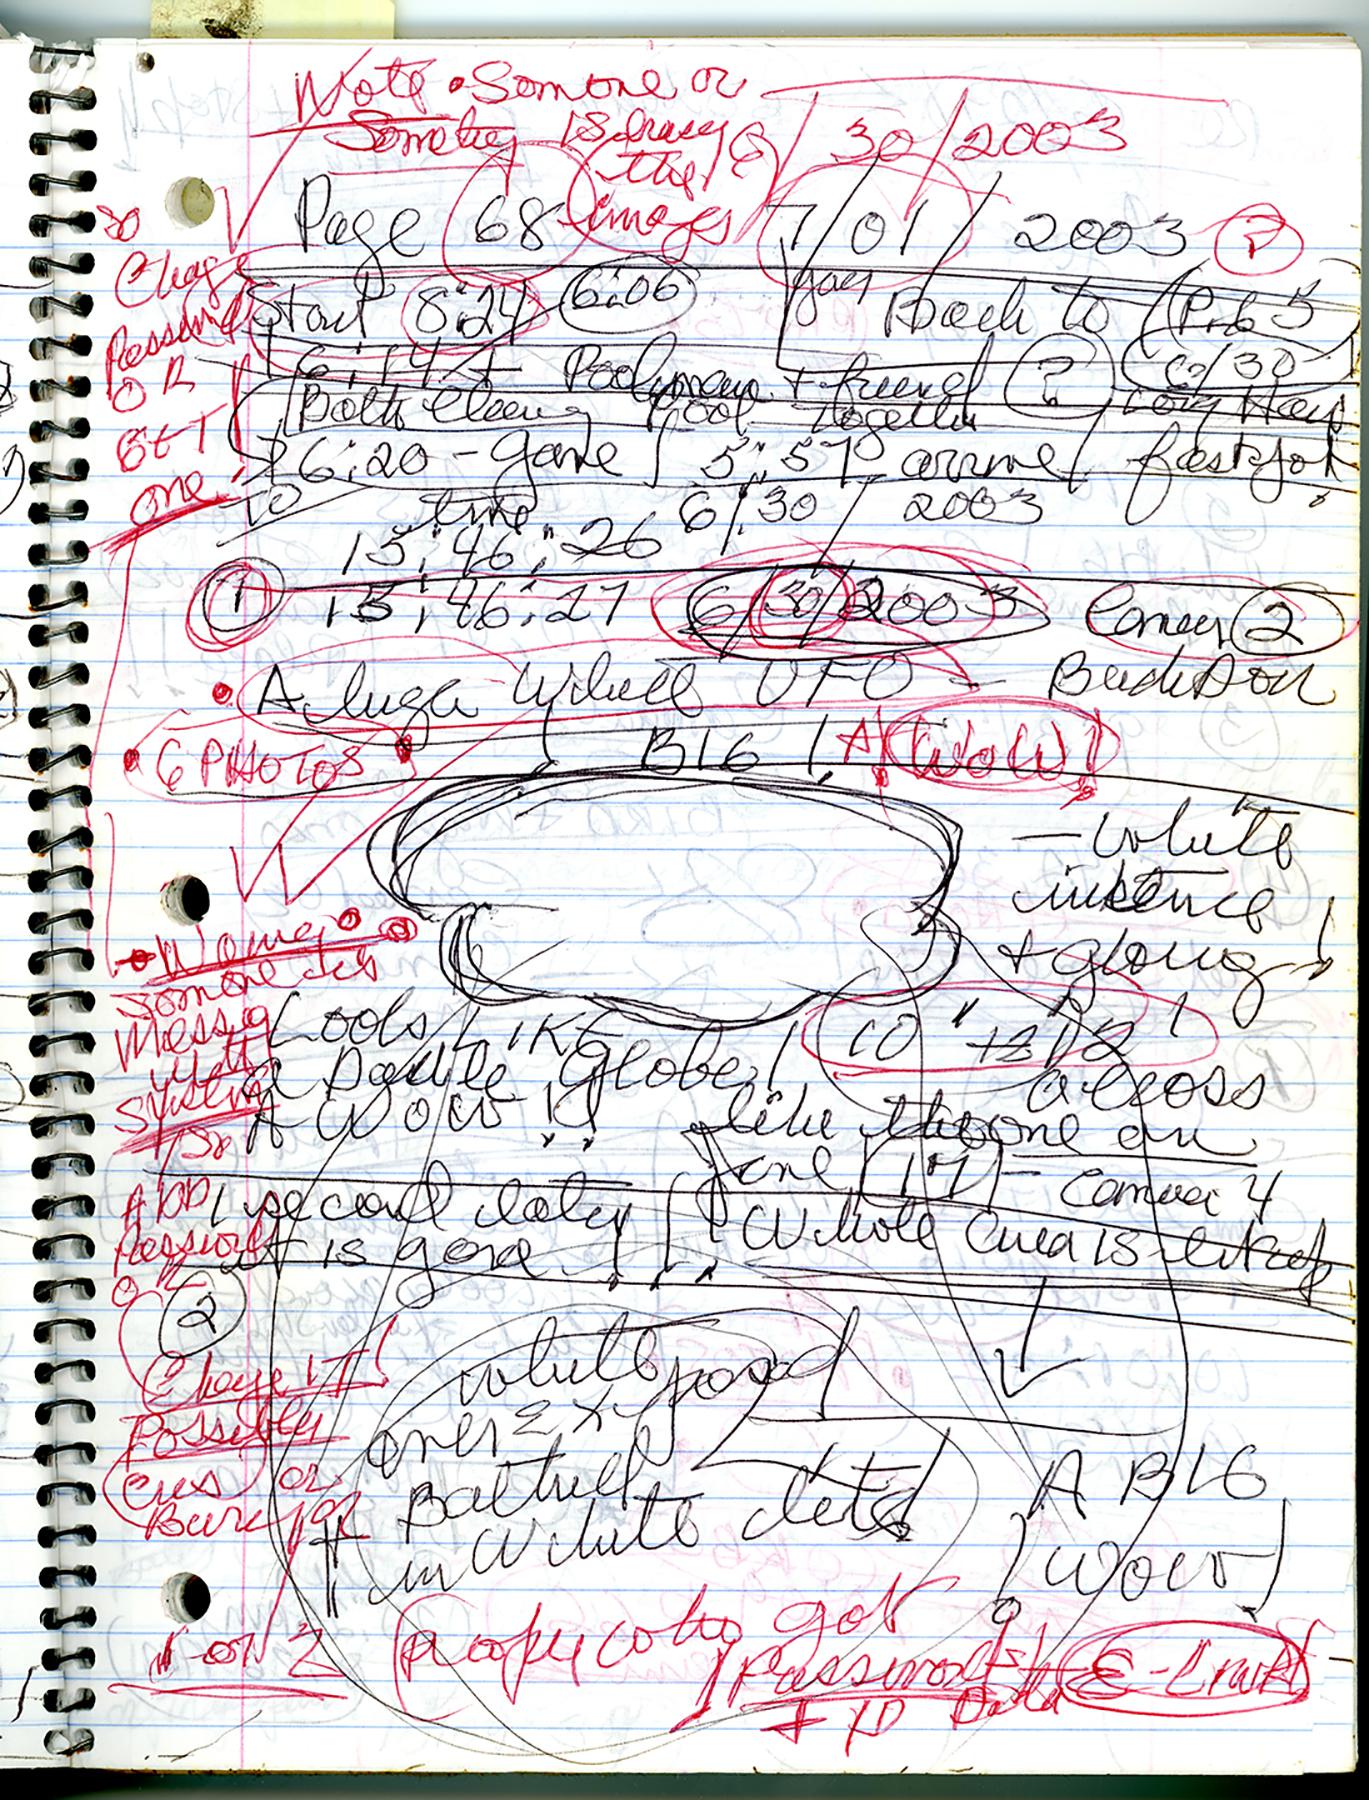 Page 68, UFO Notebook, Pacific Palisades, August 1 - Photograph by Kali